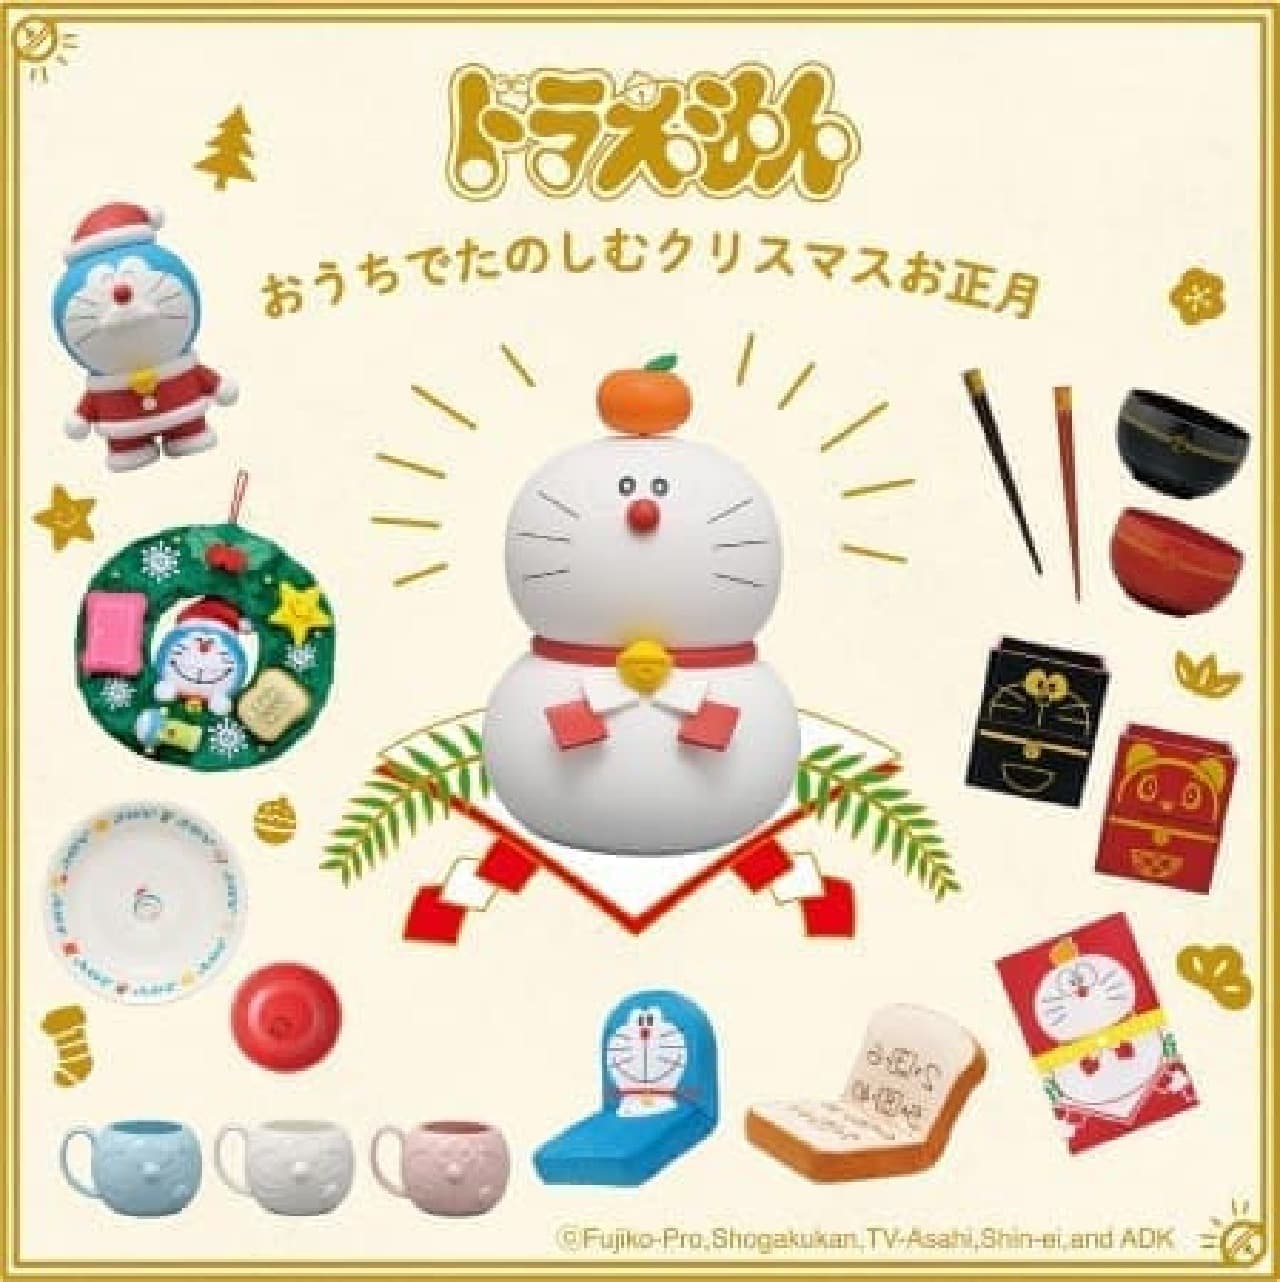 Post office online shop "Doraemon Christmas New Year to enjoy at home"